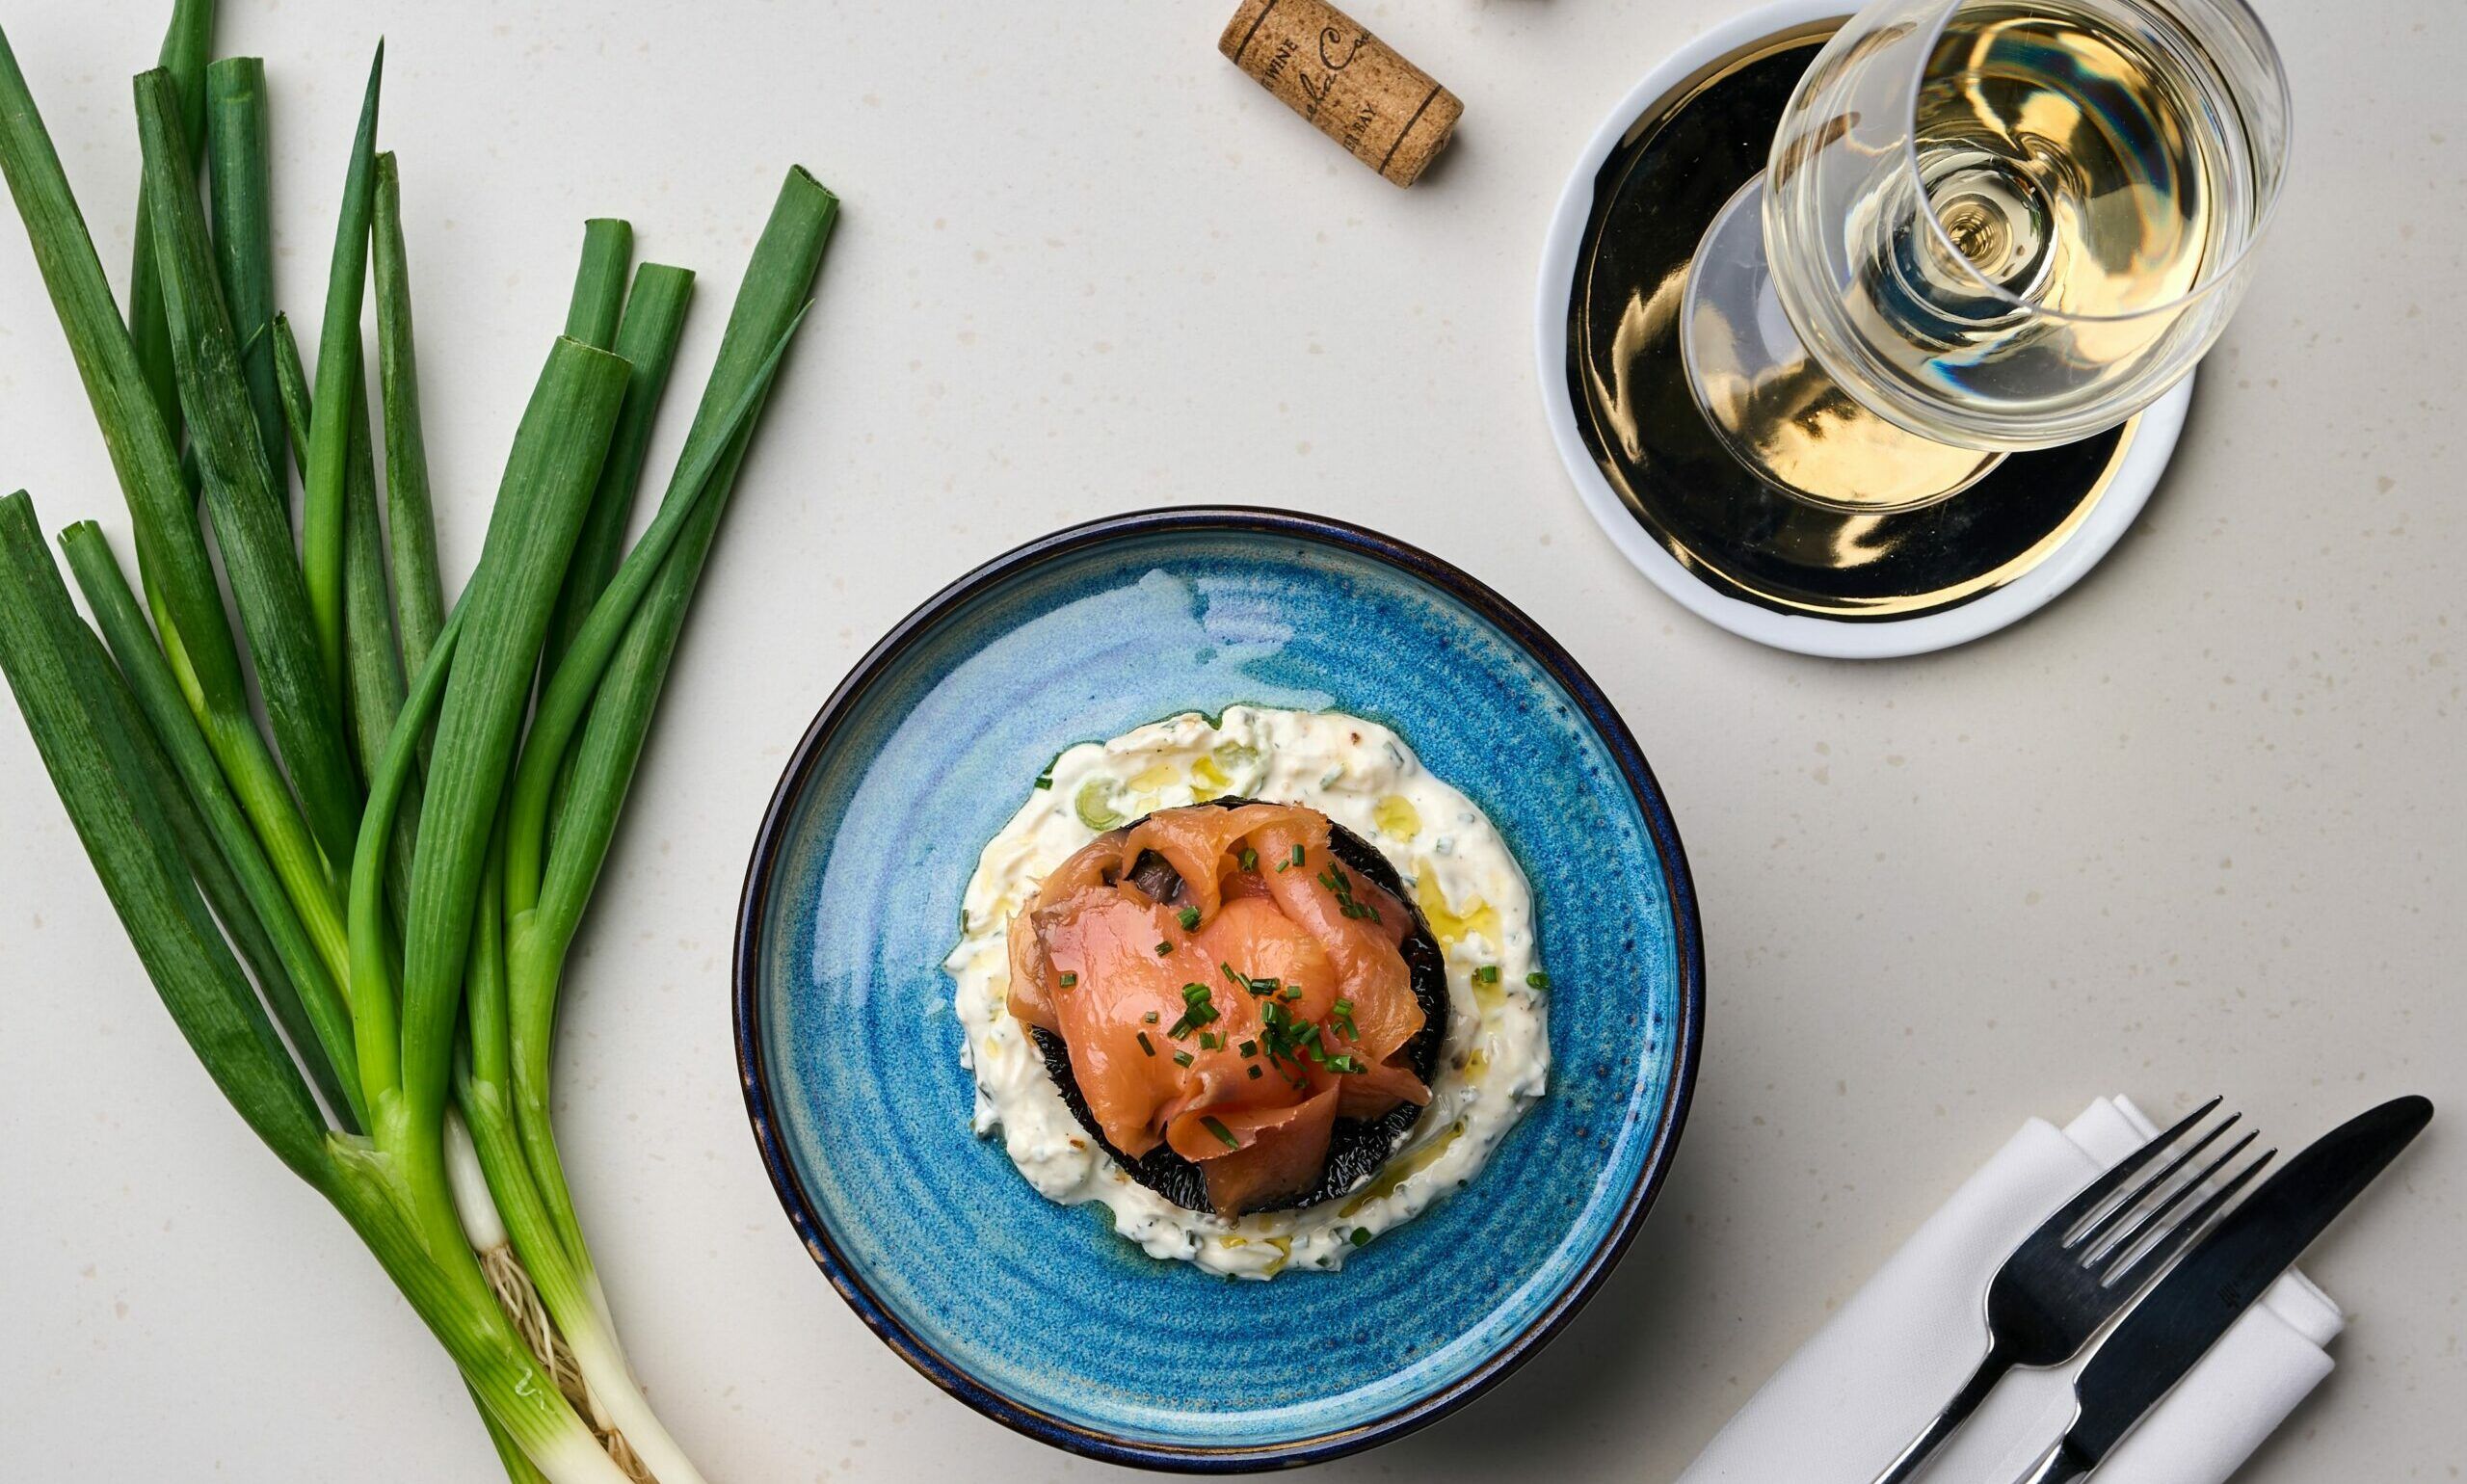 over head shot of the blue plate with salmon dish and glass of white wine and leek 